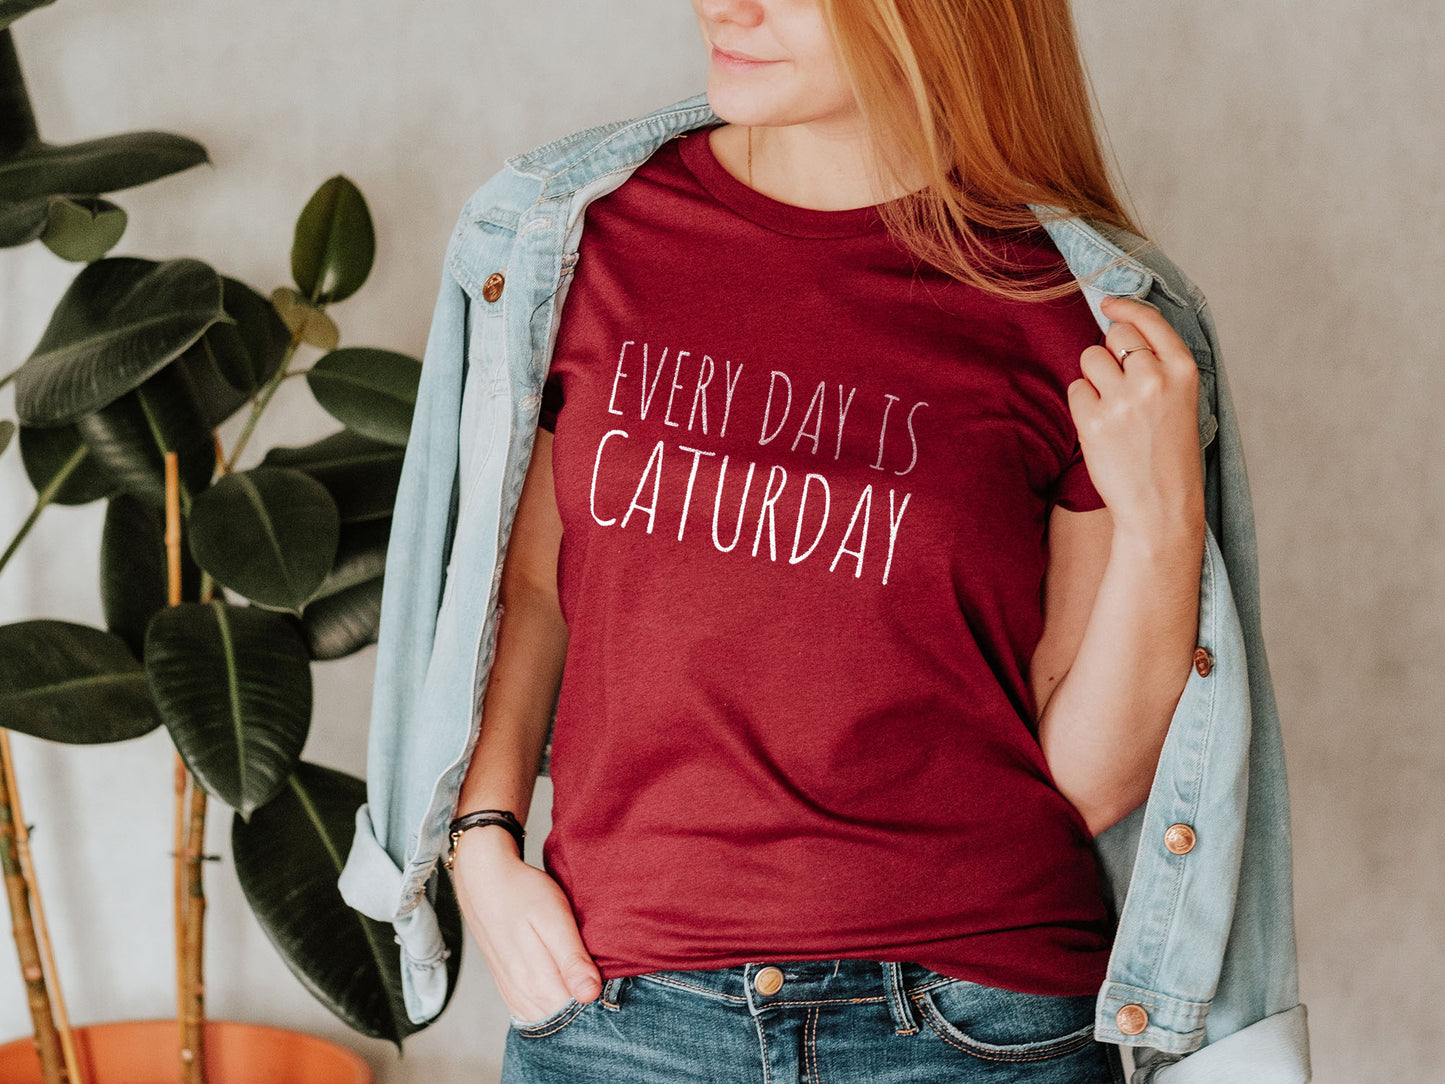 Every Day is Caturday Tee